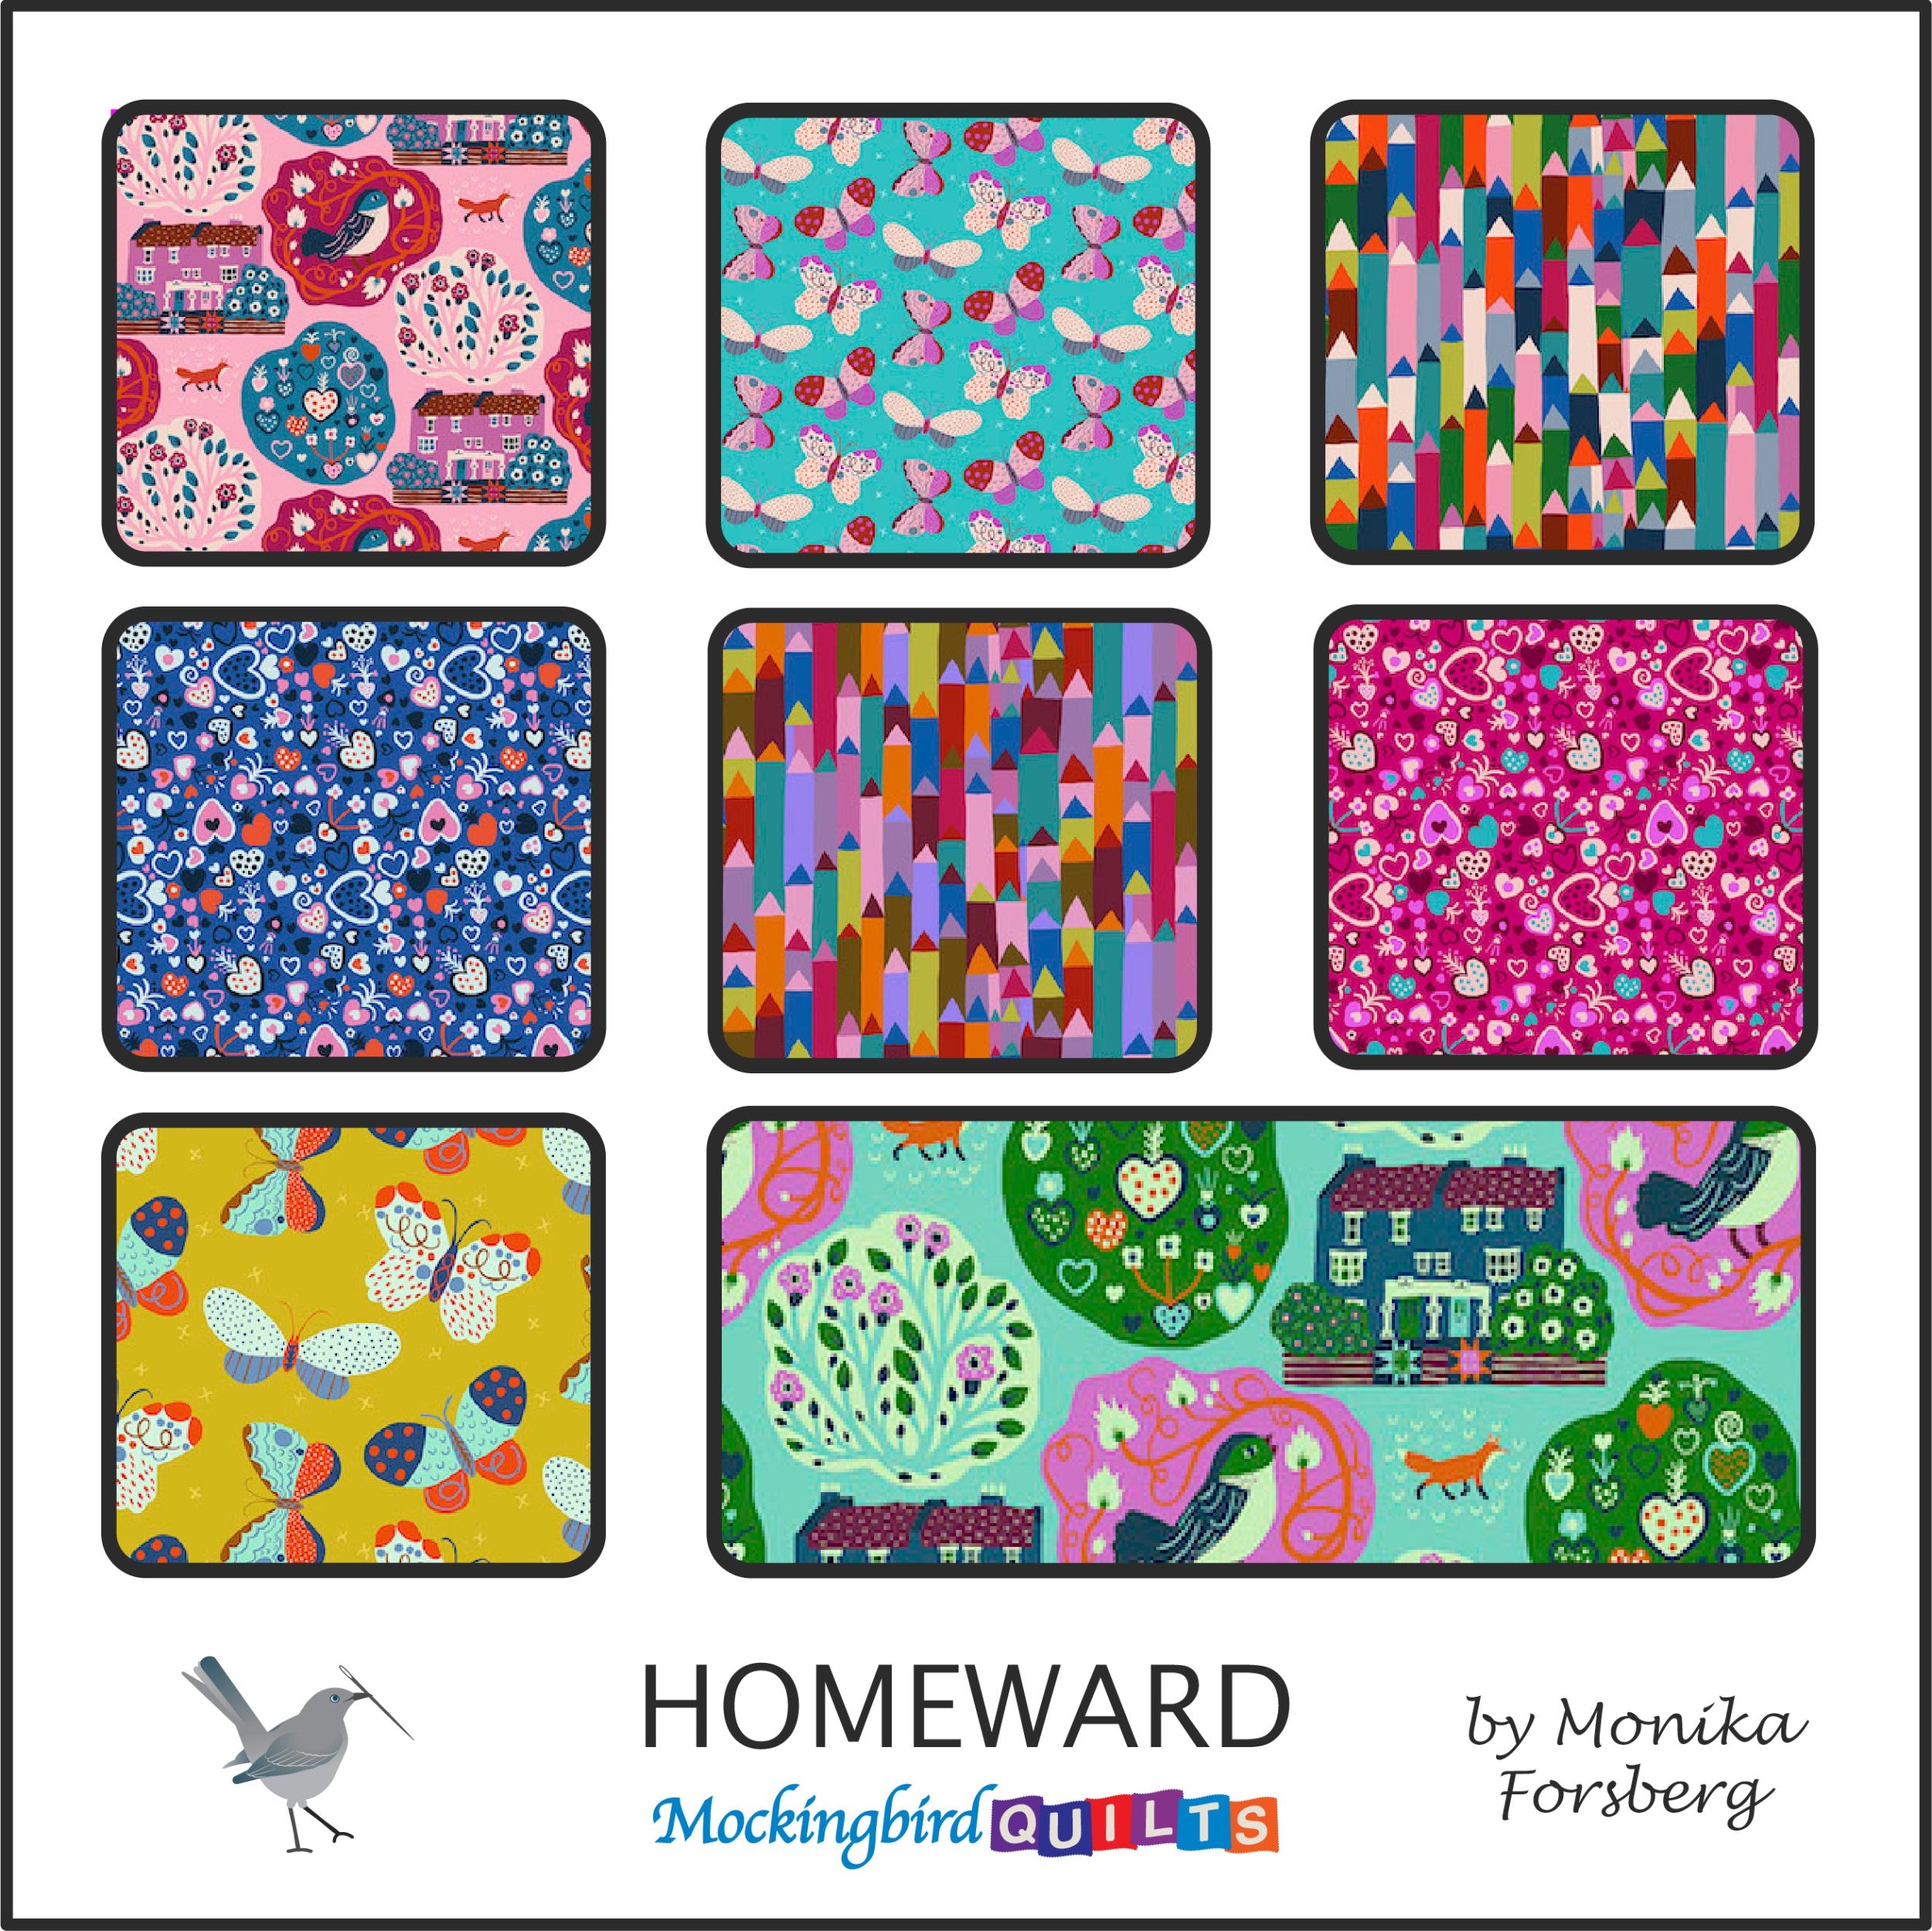 This image shows fourteen fabric swatches in the collection “Homeward” by Monika Forsberg. Layered in rich jewel tones, patterns in this line are nature-inspired with peacocks, butterflies, flowers, and vines.